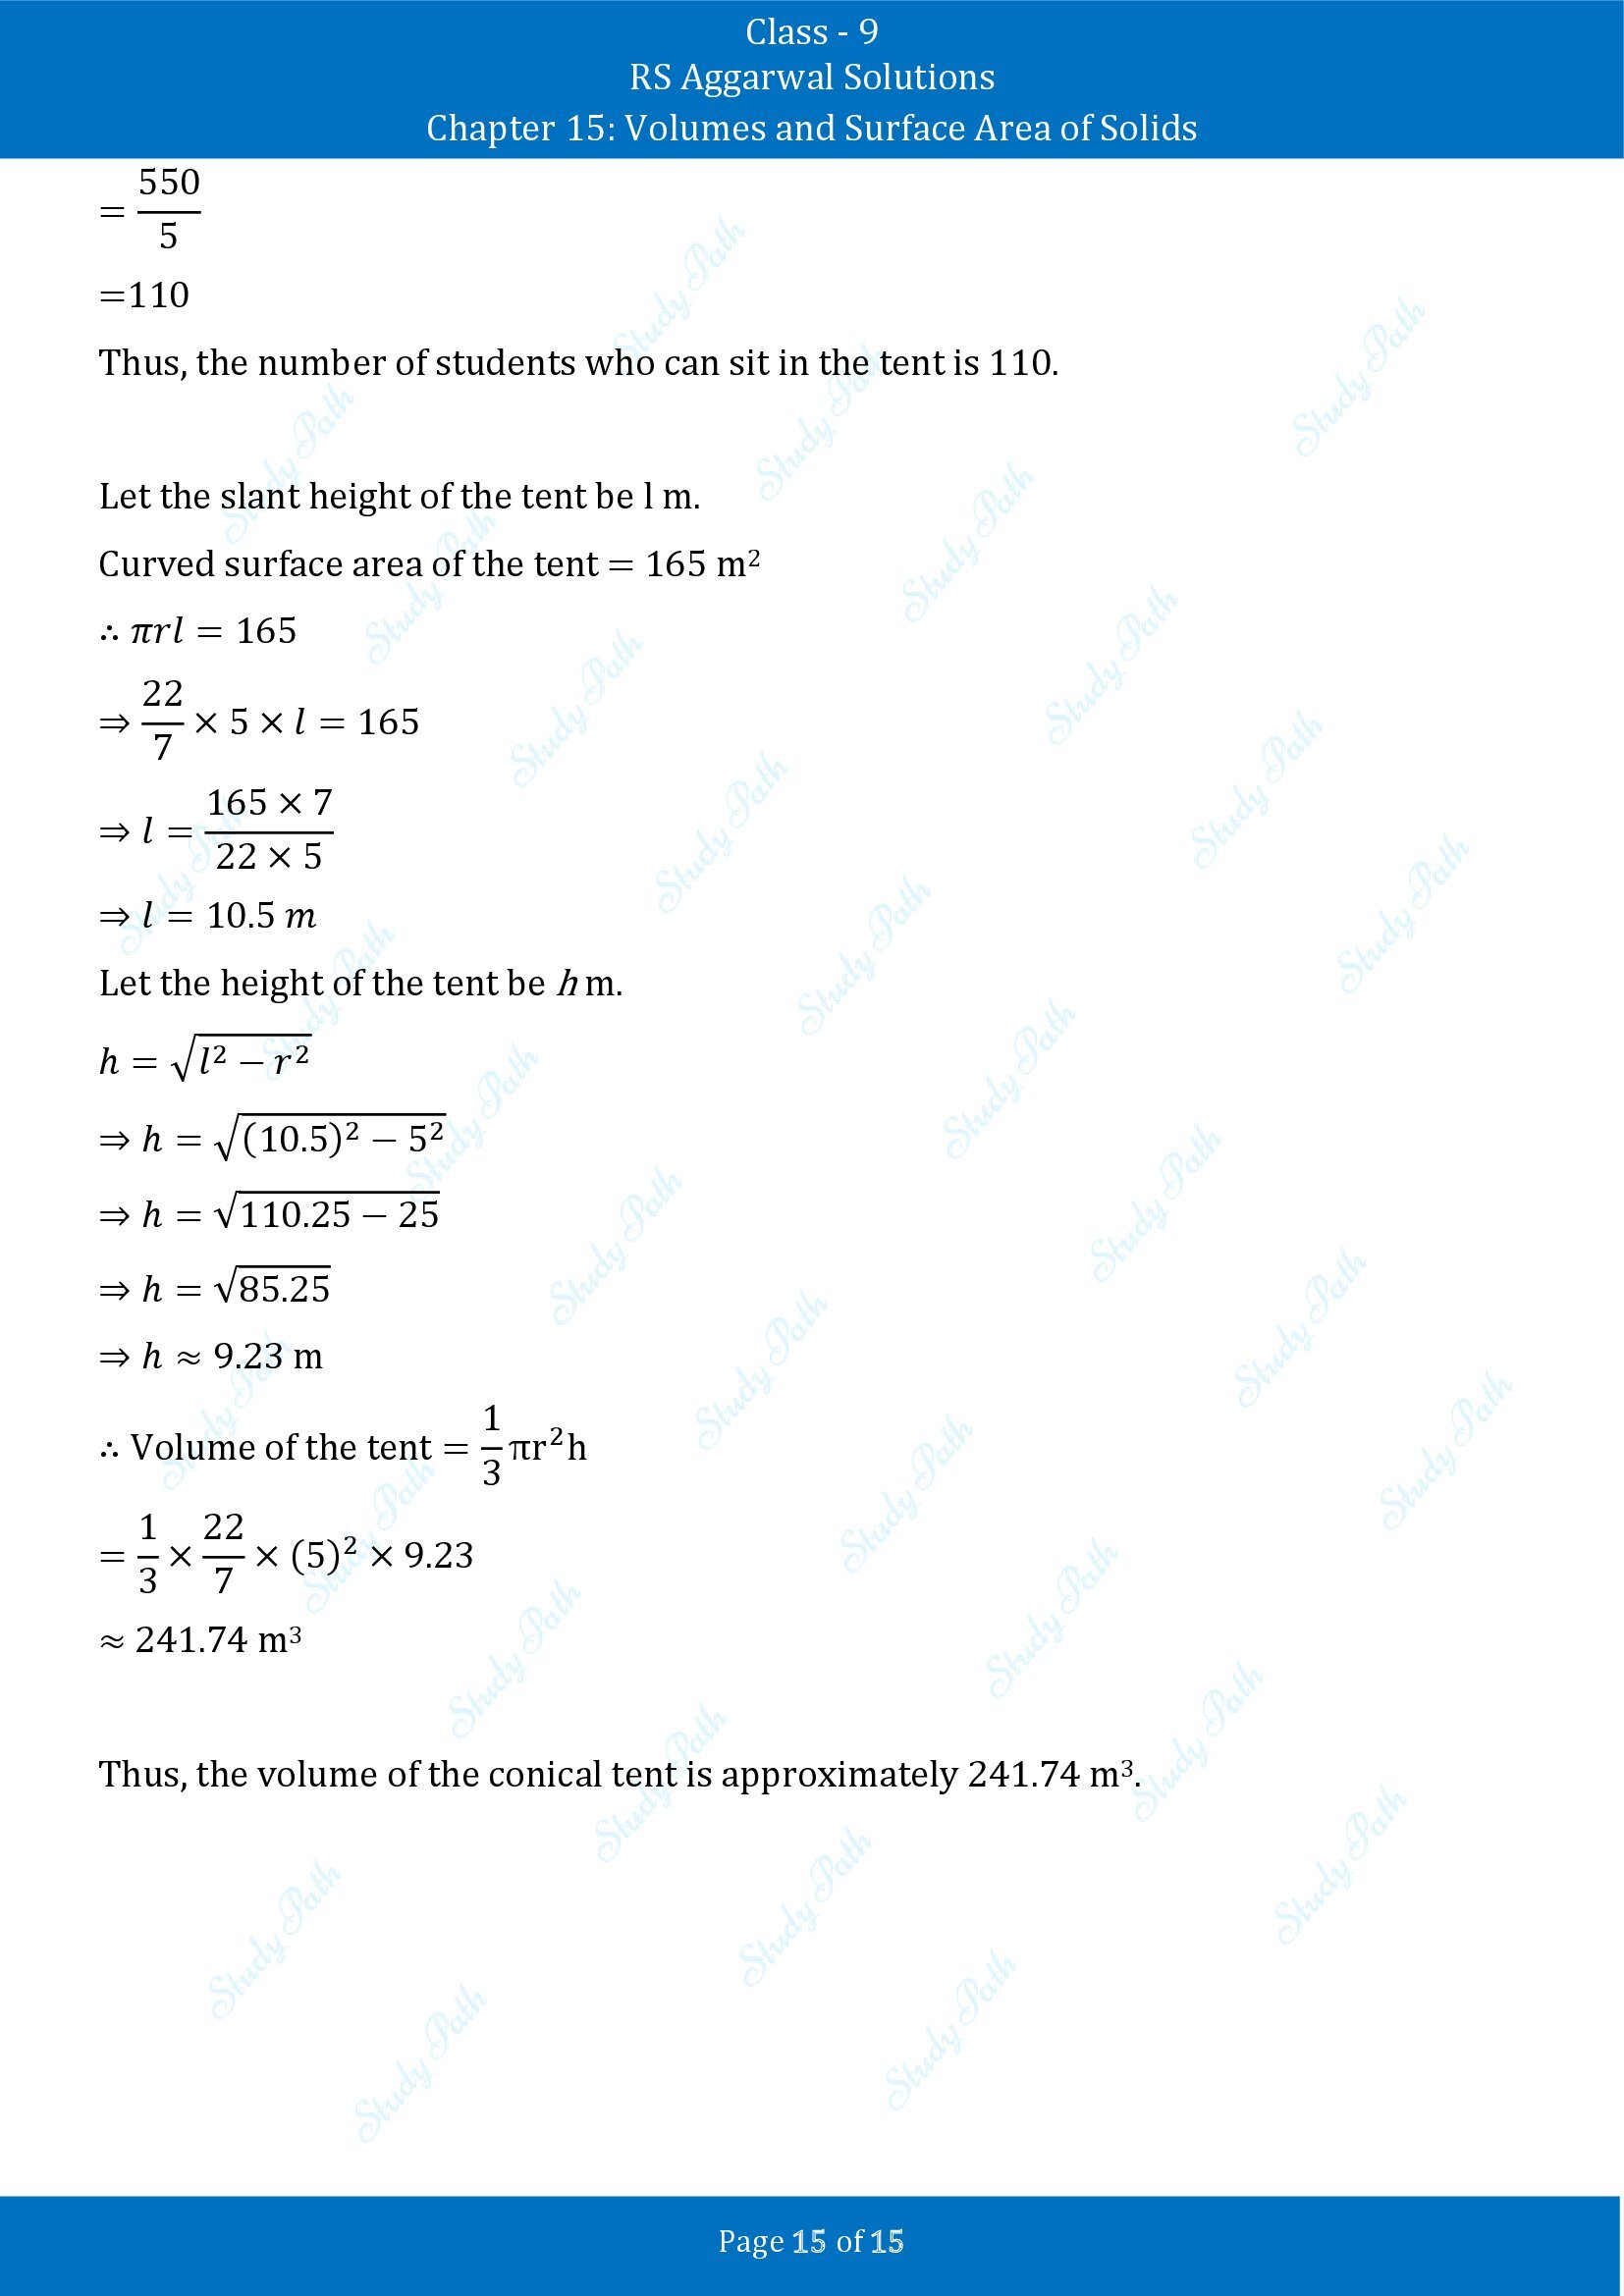 RS Aggarwal Solutions Class 9 Chapter 15 Volumes and Surface Area of Solids Exercise 15C 00015